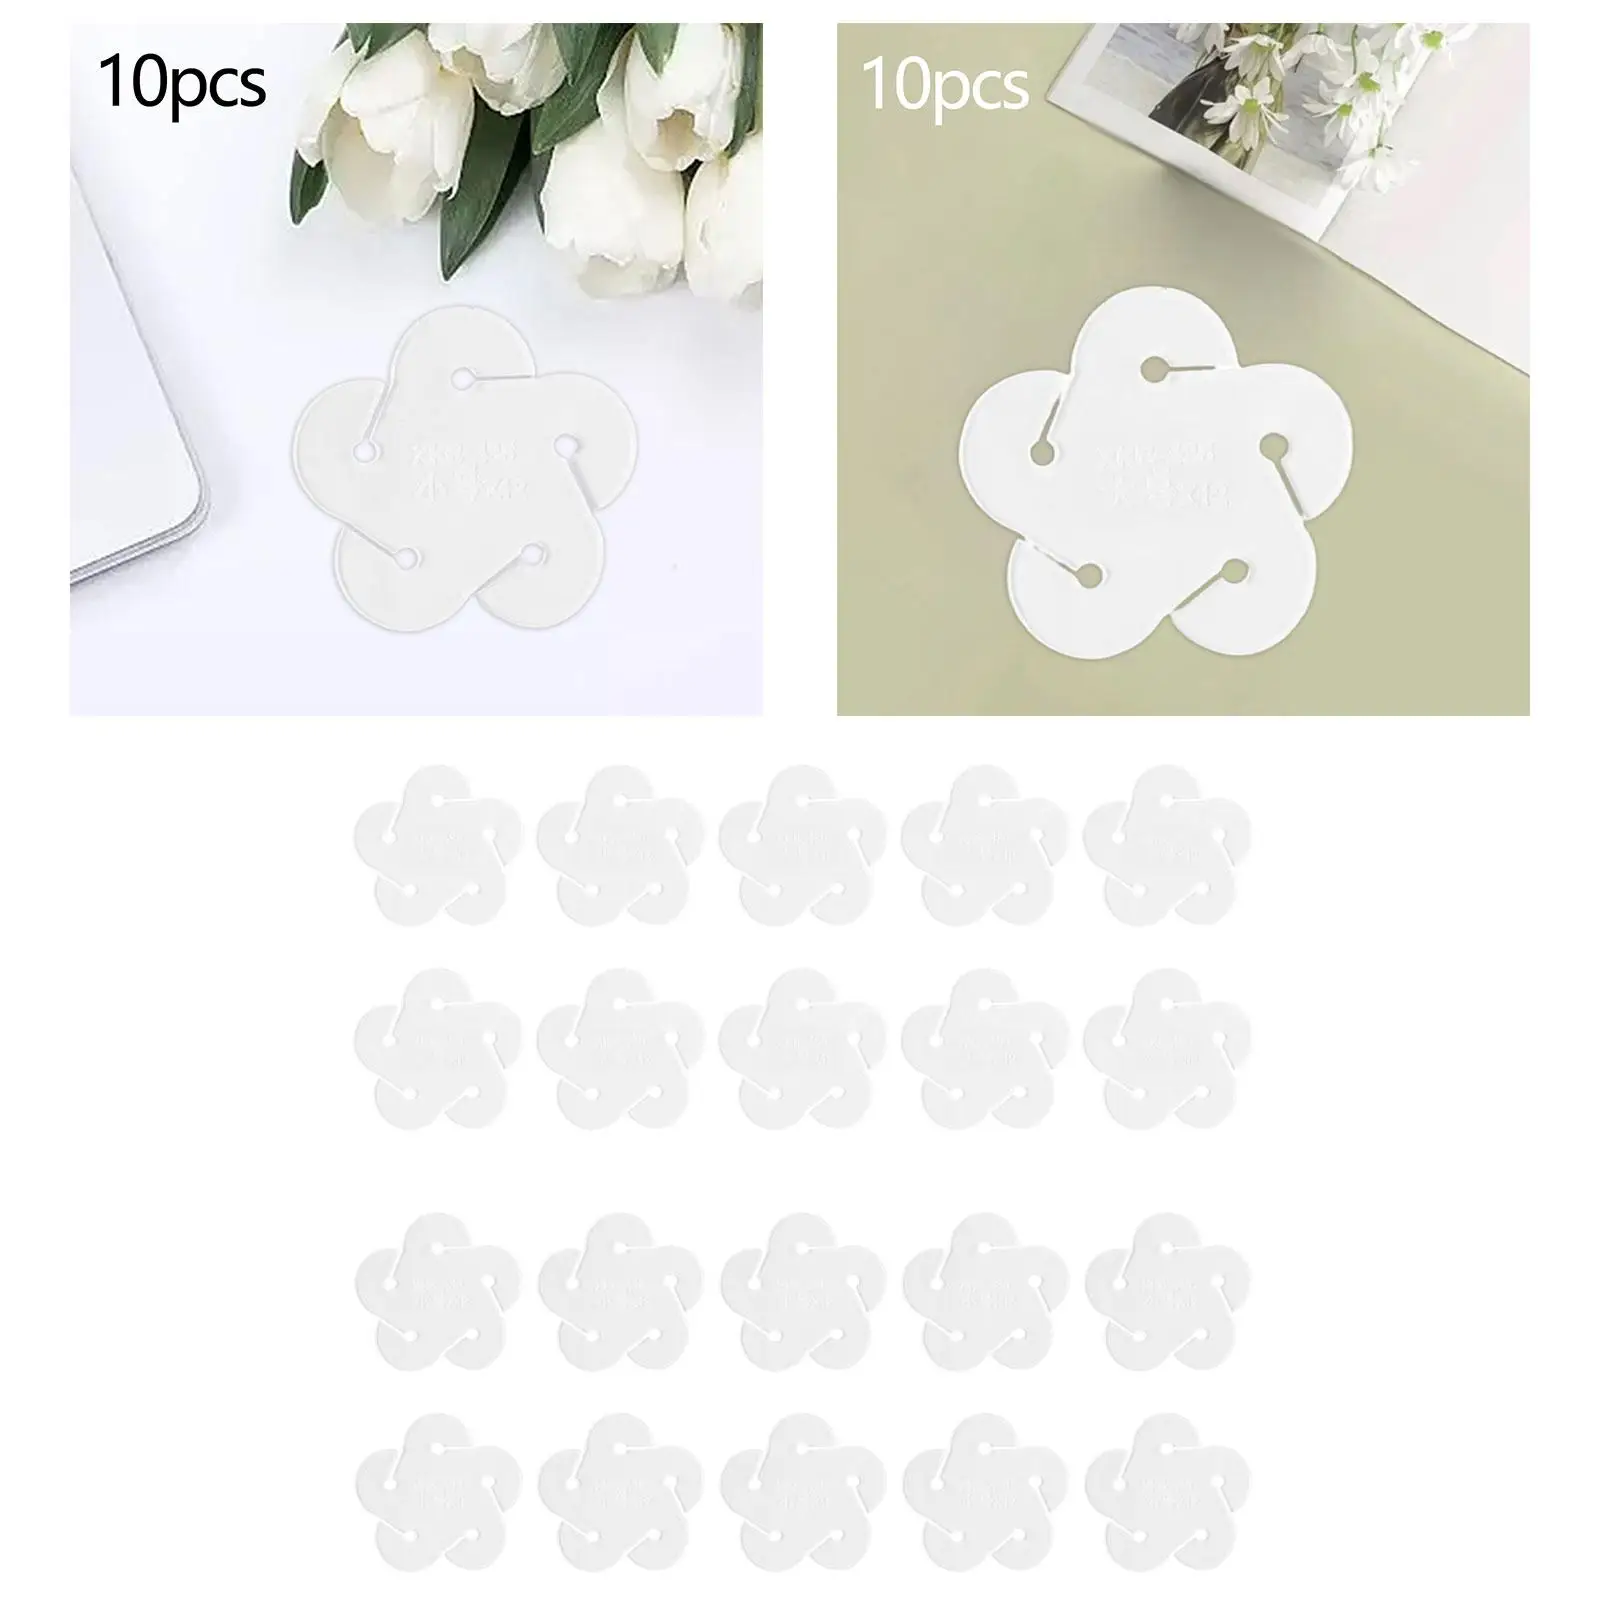 10x Key Chain Durable Multifunctional Leather Craft Pattern Stencil Model Pattern Acrylic Clear Template for Marking Accs